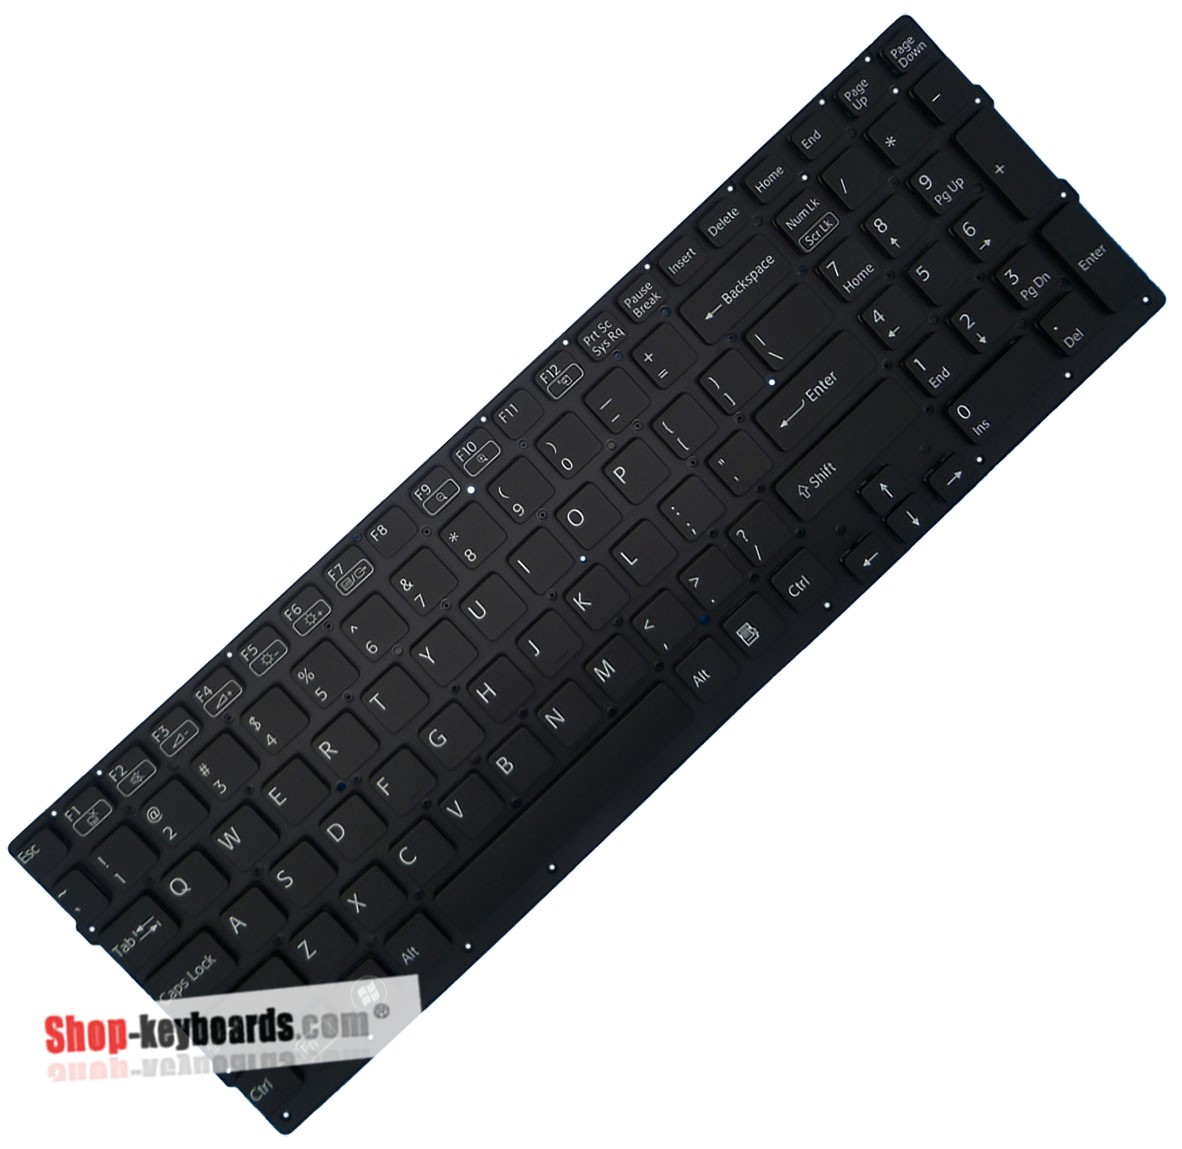 Sony VAIO VPC-CB23FX/G Keyboard replacement